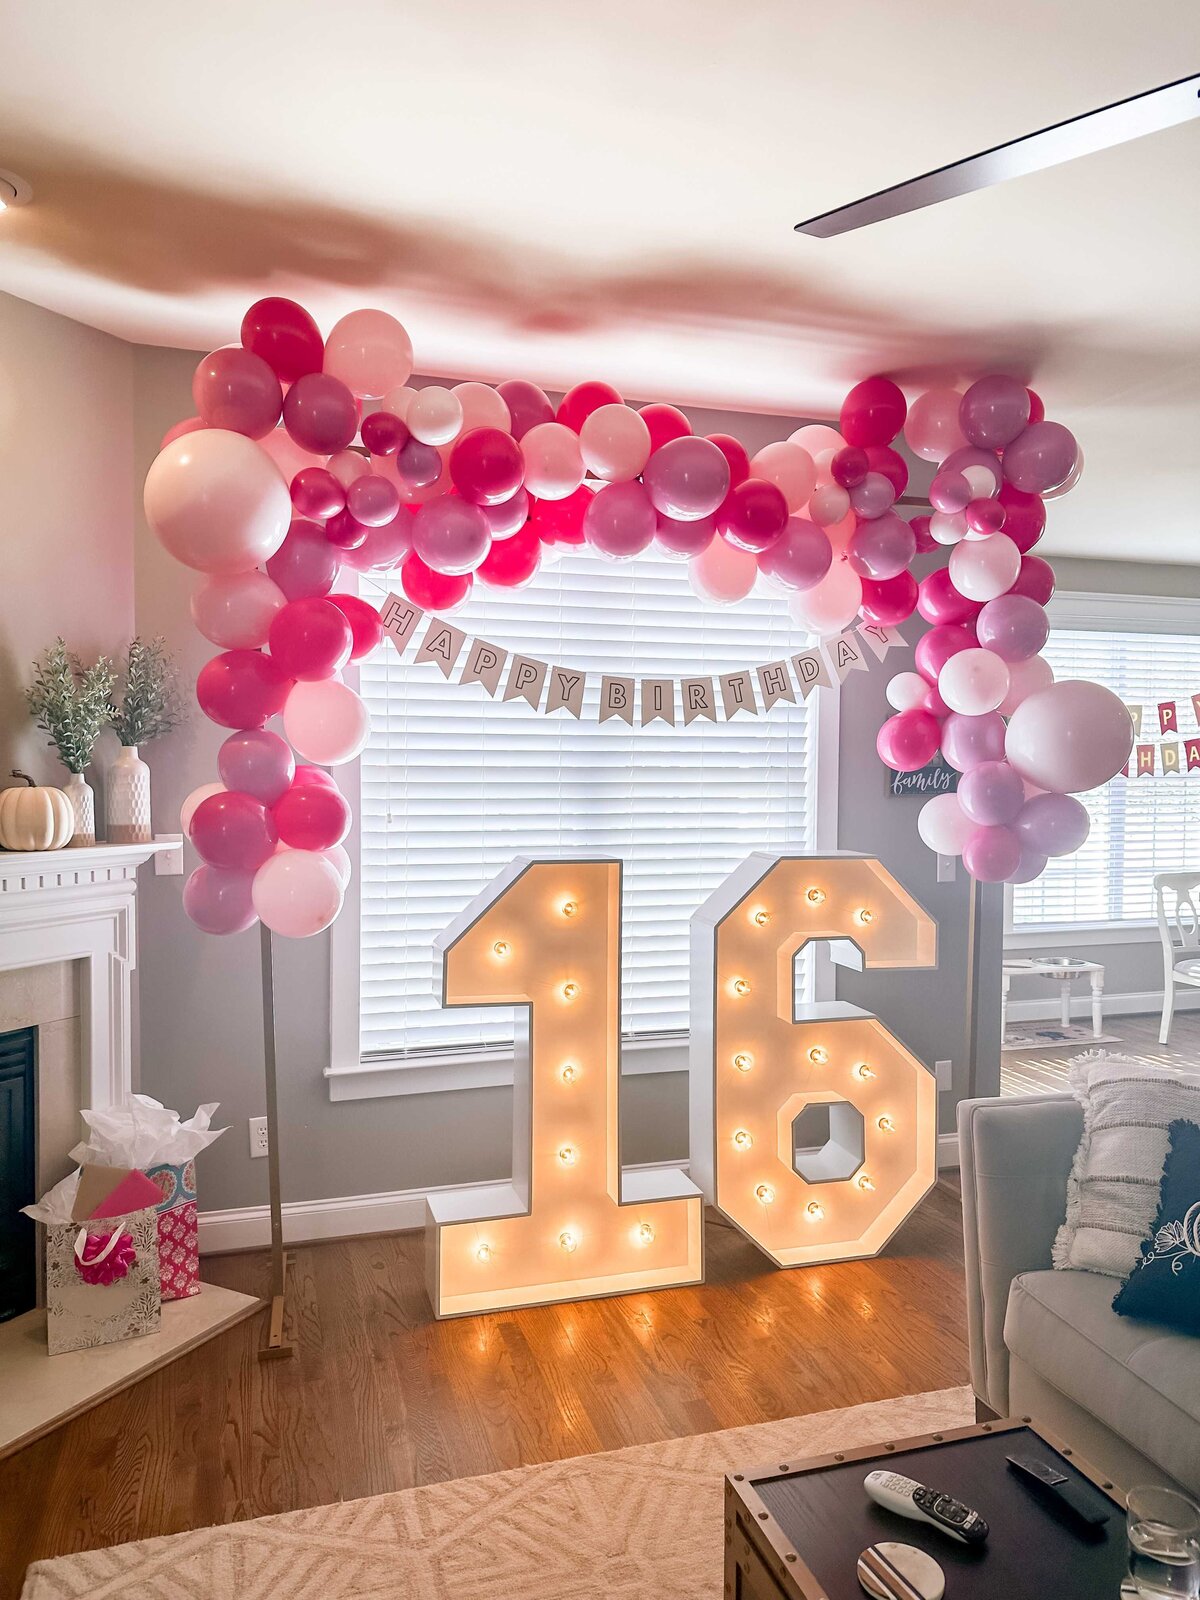 Sweet 16 mosaic with pink balloons